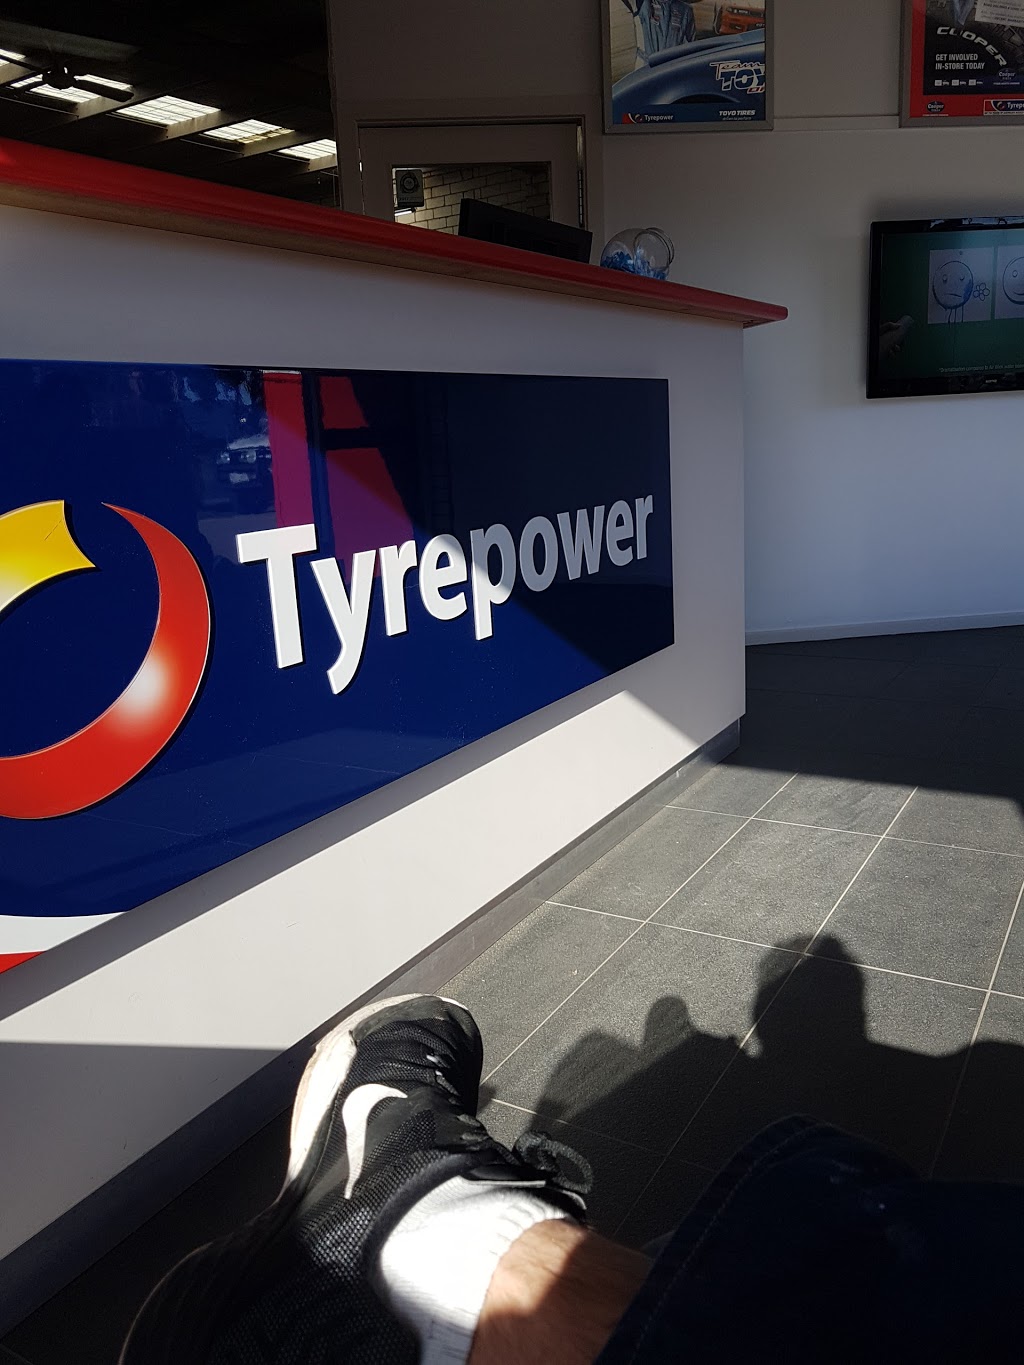 Tucketts Tyrepower | Factory 1, factory 3/238 S Gippsland Hwy, Cranbourne VIC 3977, Australia | Phone: (03) 5996 7877